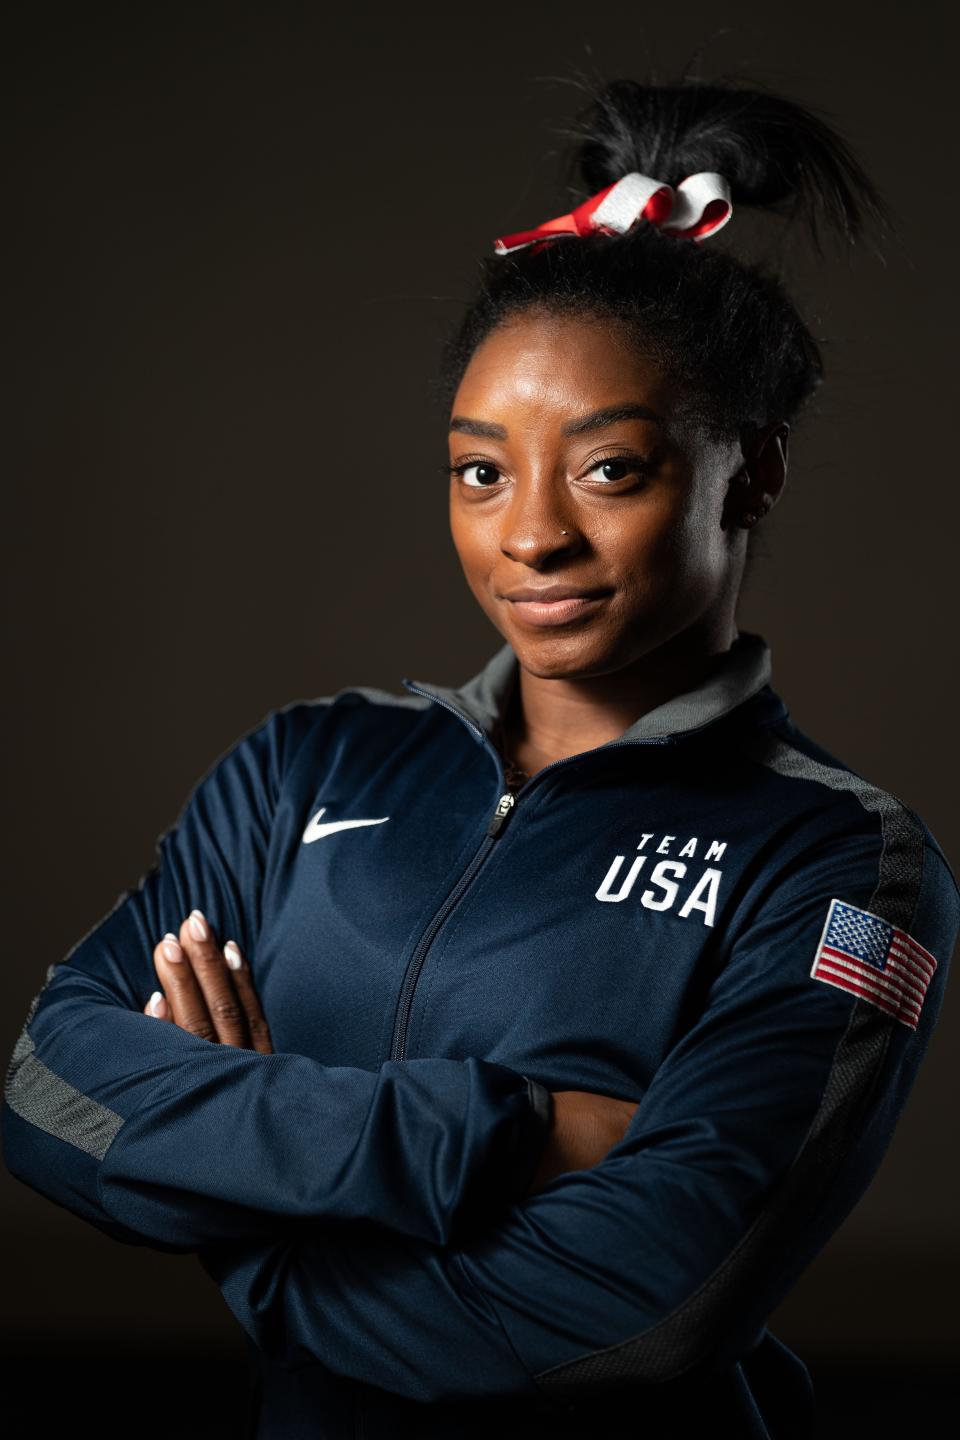 Simone Biles hasn’t lost an all-around competition since 2013.